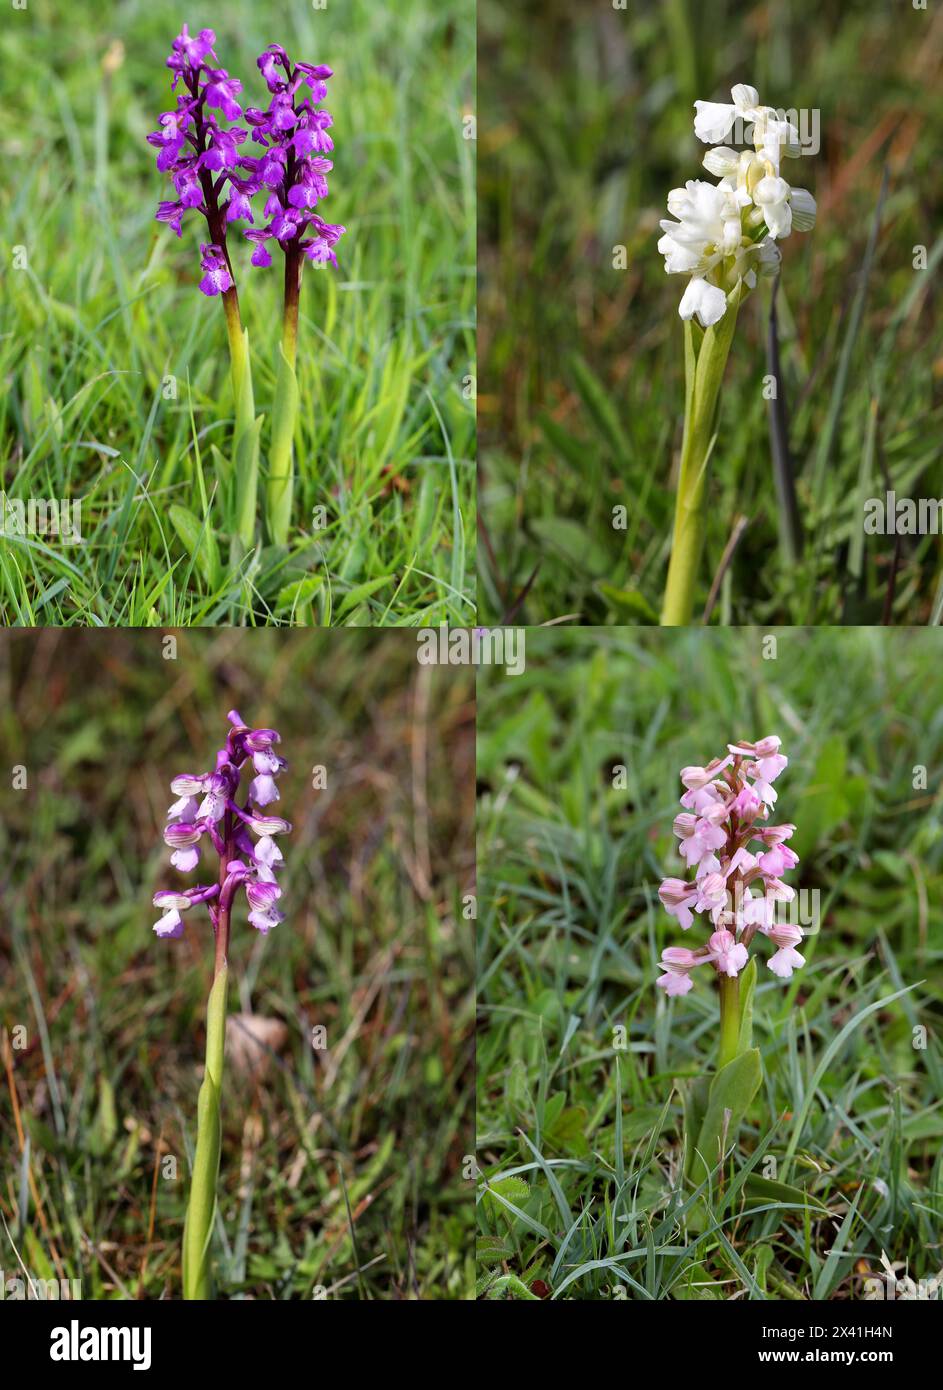 Green-winged Orchid or Green-veined Orchid, Anacamptis morio (Orchis morio), Orchidaceae. Bernwood Meadows, Oxfordshire, UK. Colour Variations. Stock Photo